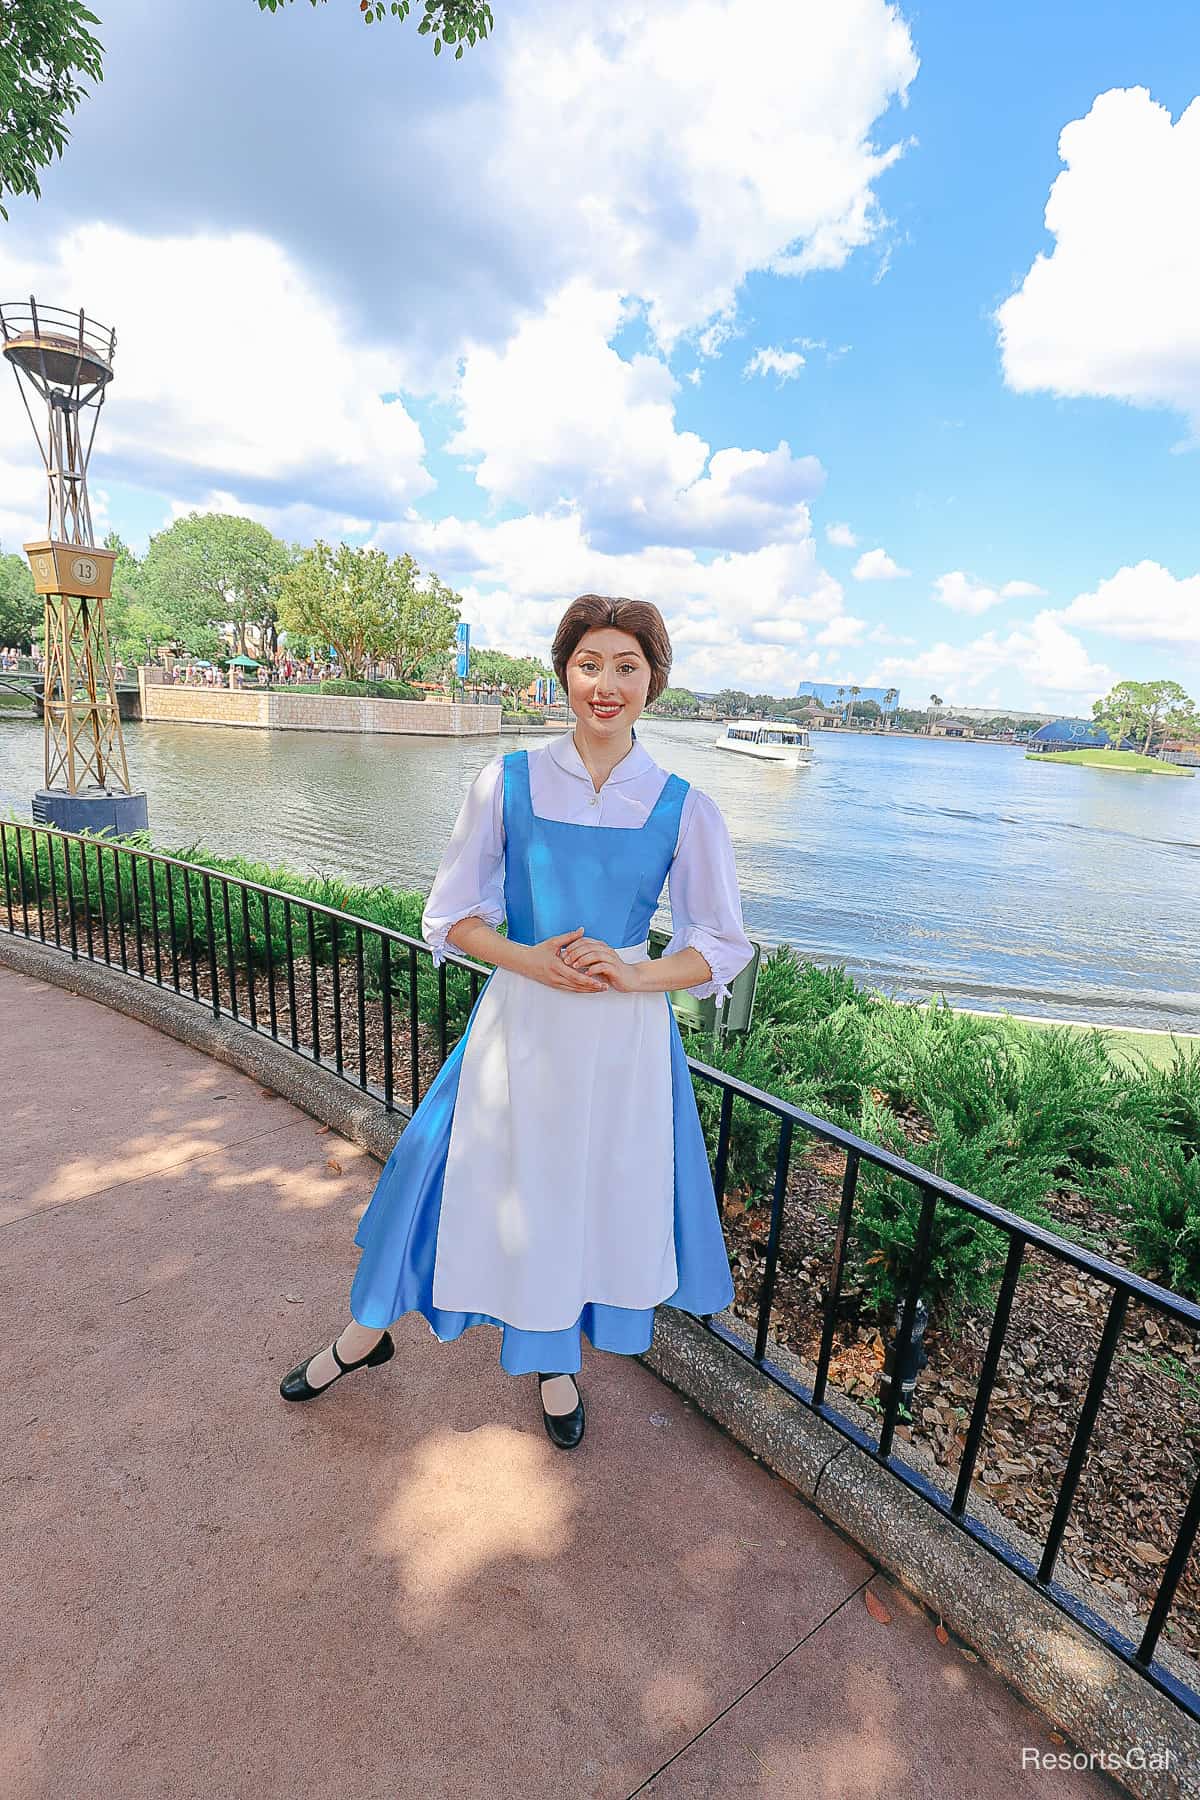 Belle poses for a photo with a boat in the World Showcase Lagoon behind her. 